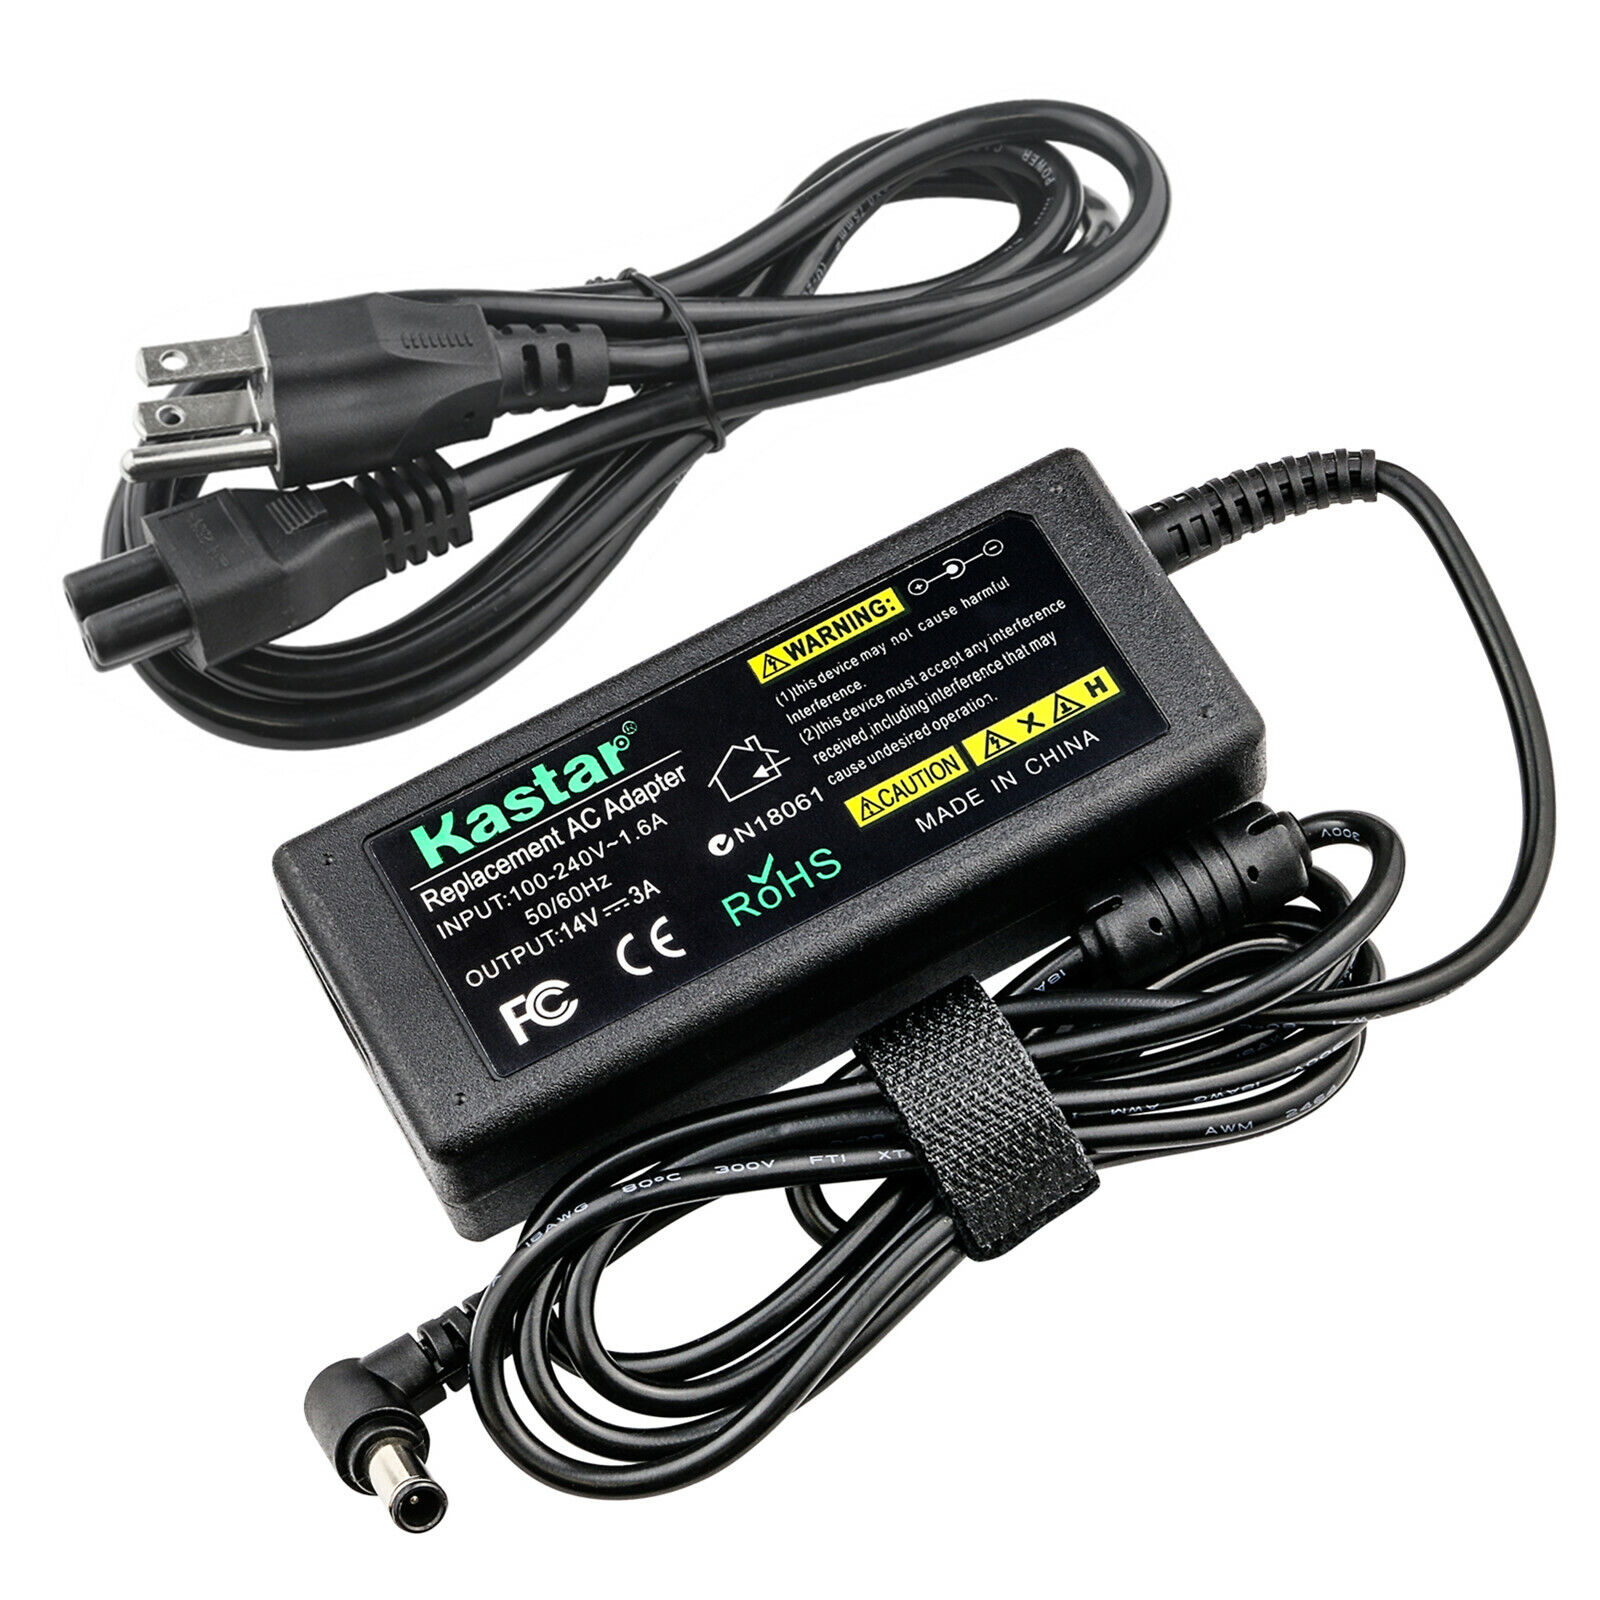 *Brand NEW*for Samsung LTM1555B LCD Monitor S20A350B For Sale Kastar 14V AC/DC Adapter Power Supply